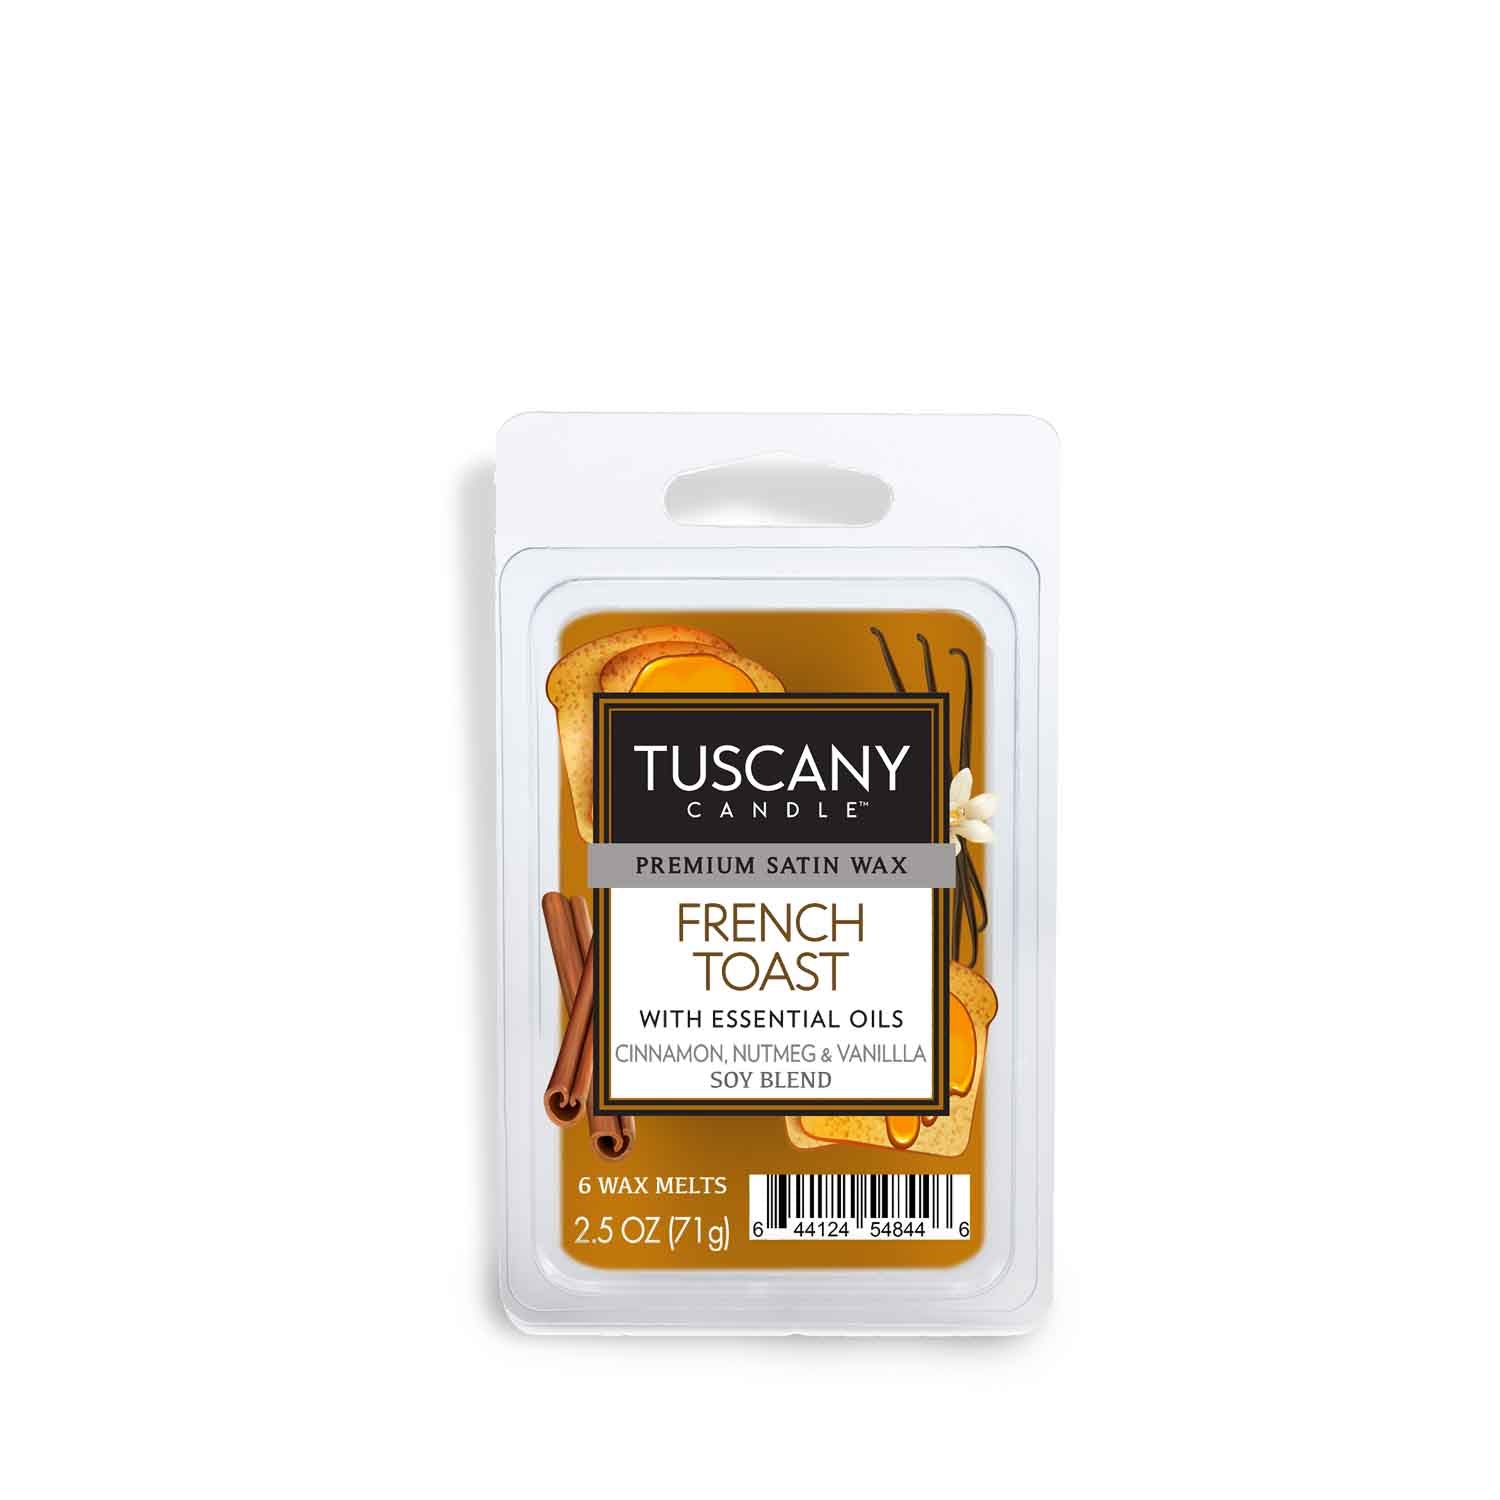 Tuscany Candle® French Toast Scented Wax Melt (2.5 oz) is a delightful fragrance that will transport you to the heart of Italy. This wax melt tart bar offers a strong and long-lasting scent, perfect for filling your space.